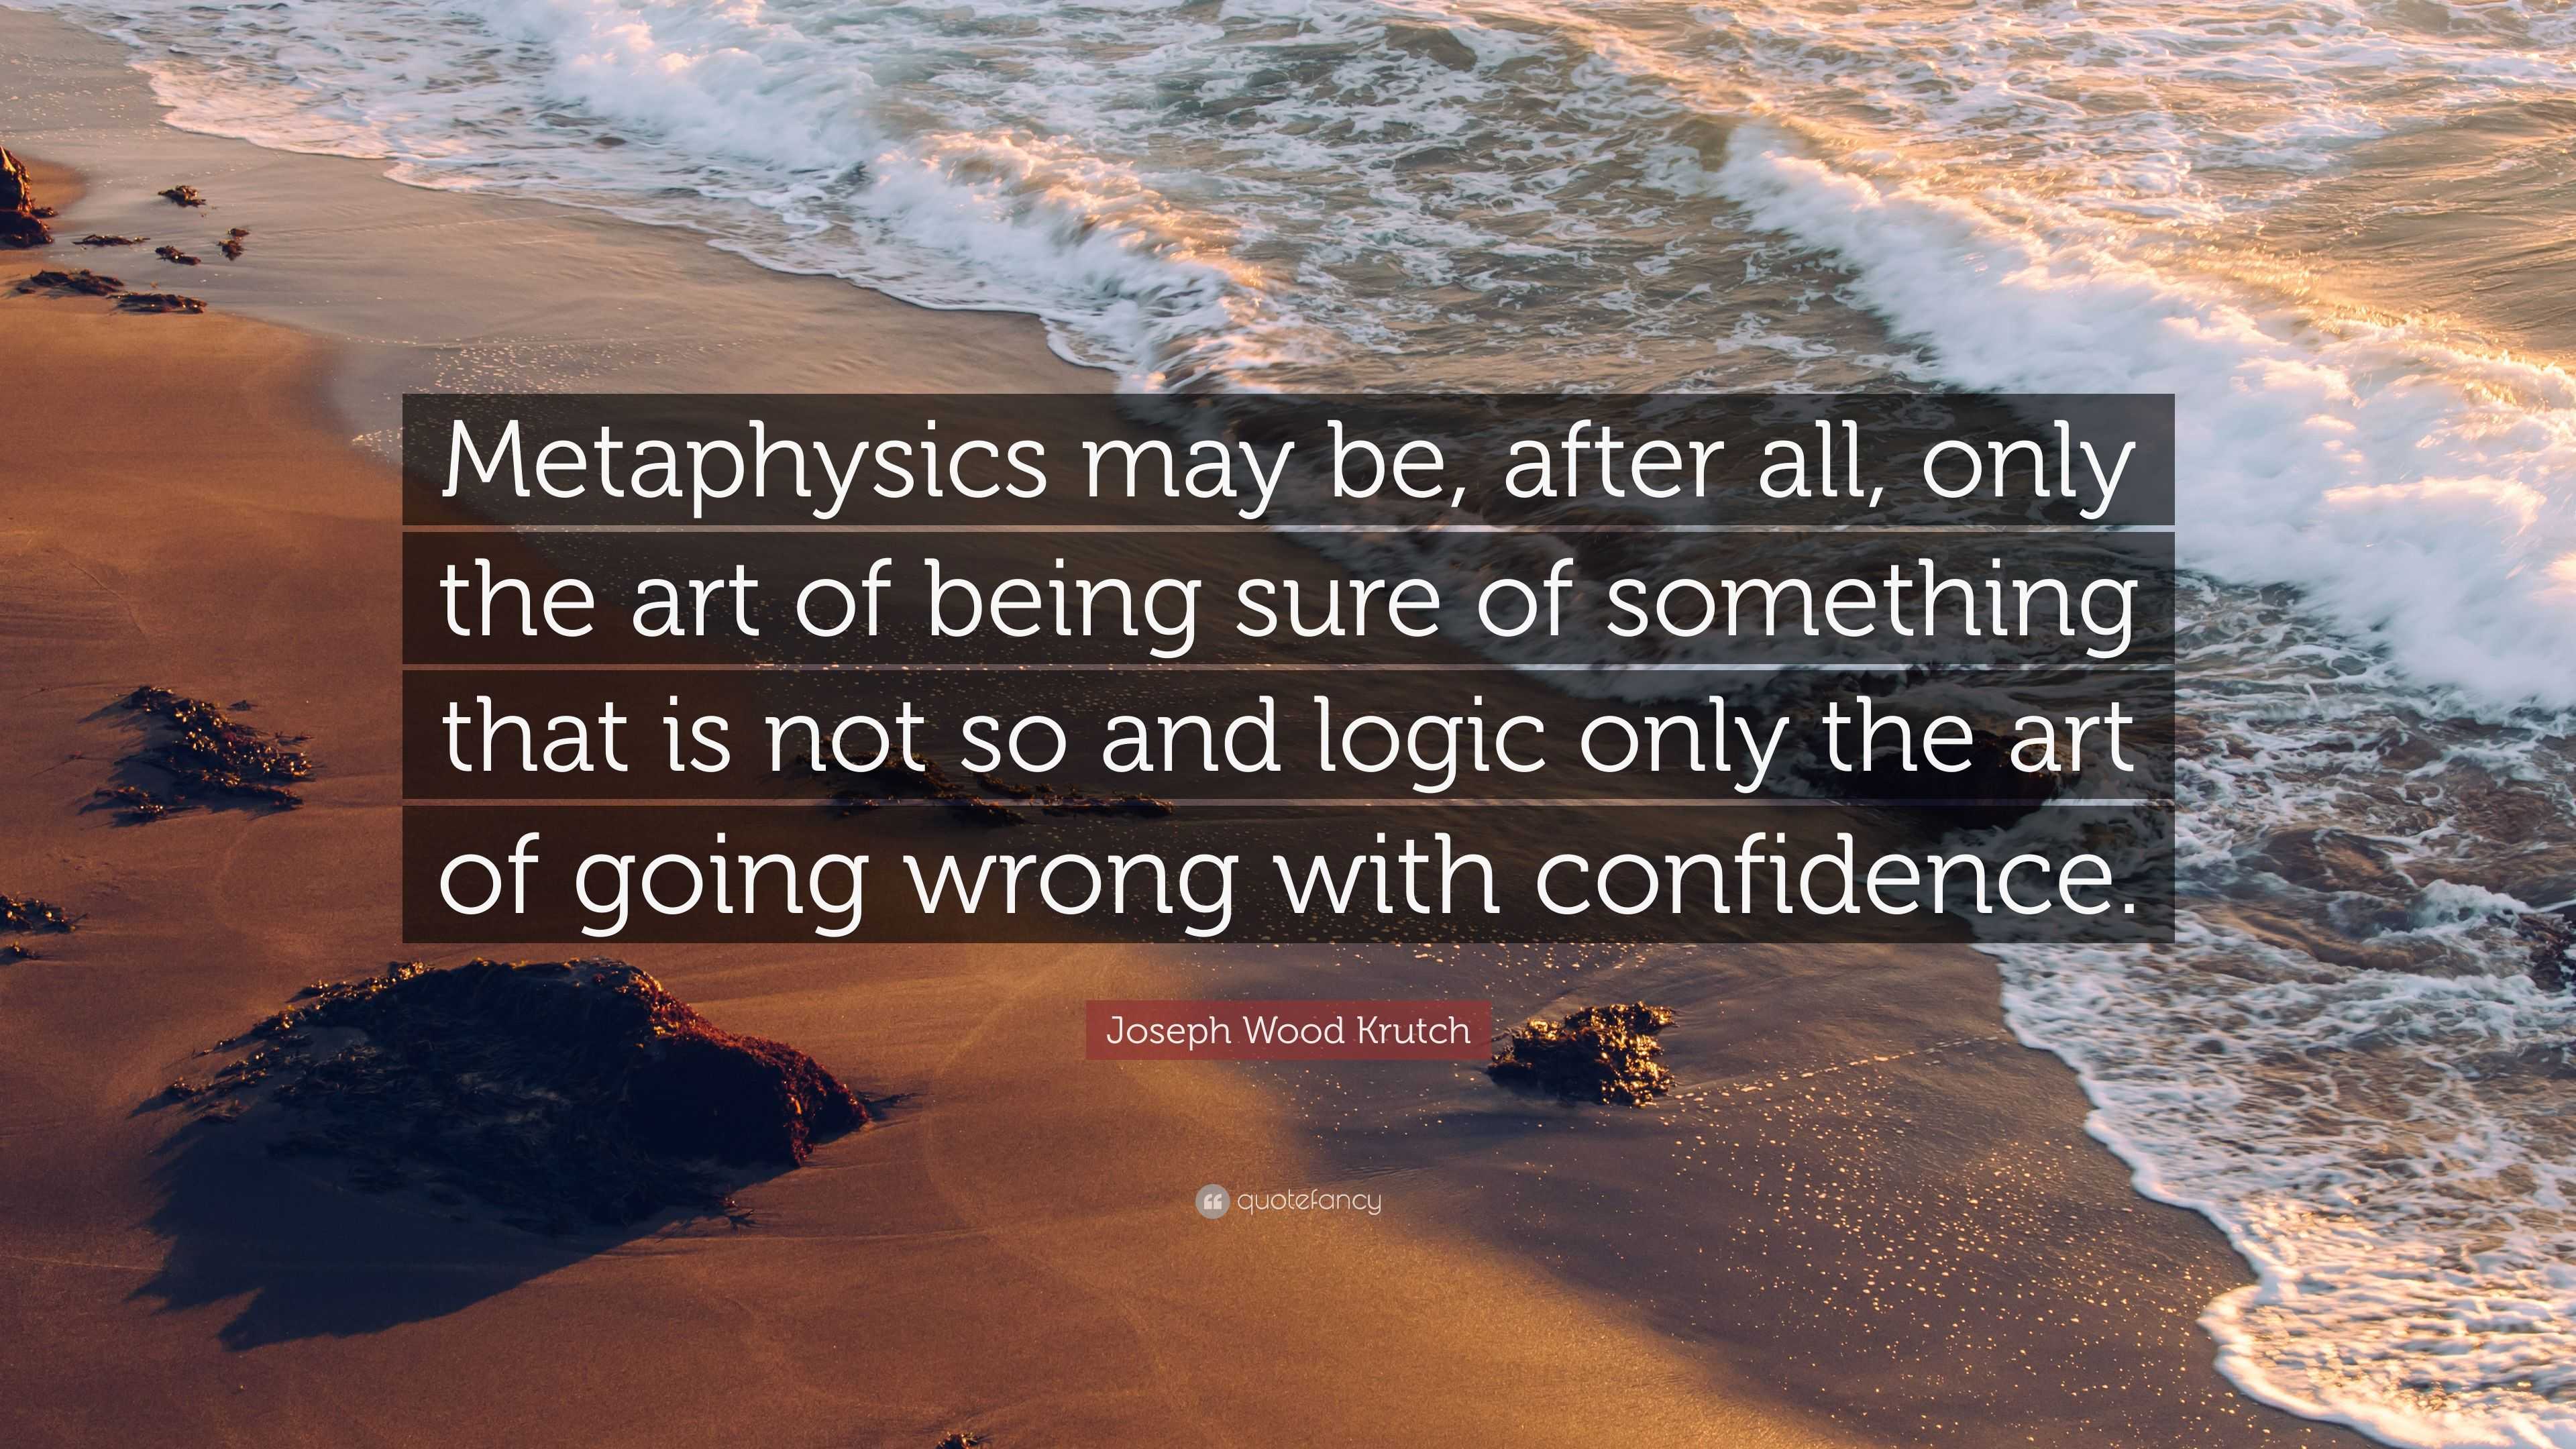 Joseph Wood Krutch Quote: “Metaphysics may be, after all, only the art ...